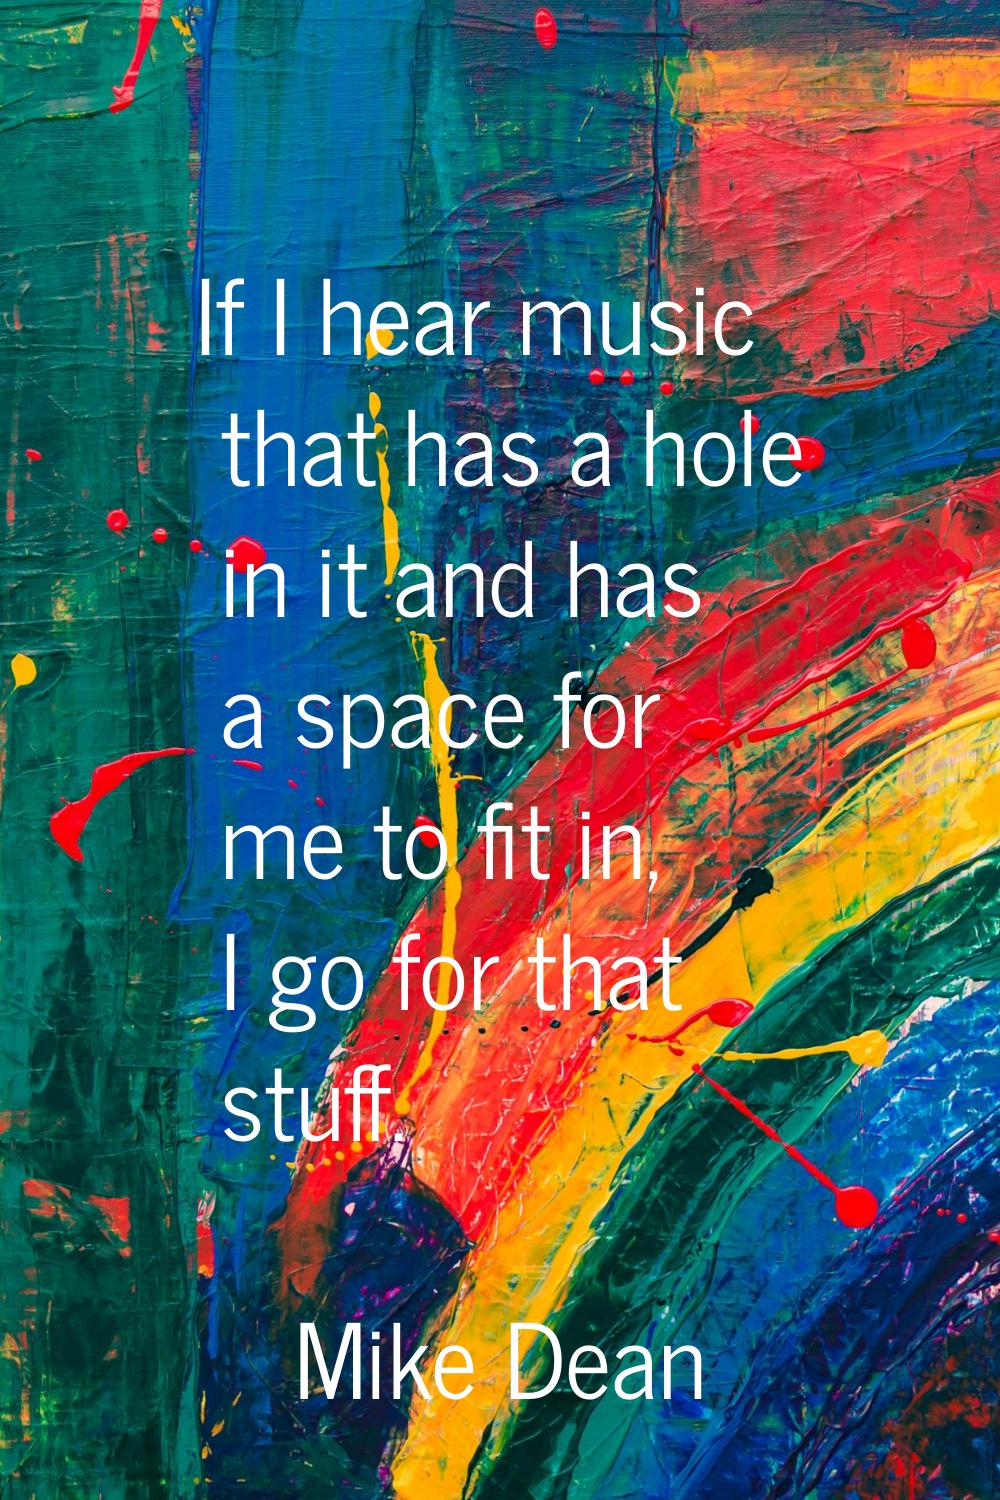 If I hear music that has a hole in it and has a space for me to fit in, I go for that stuff.